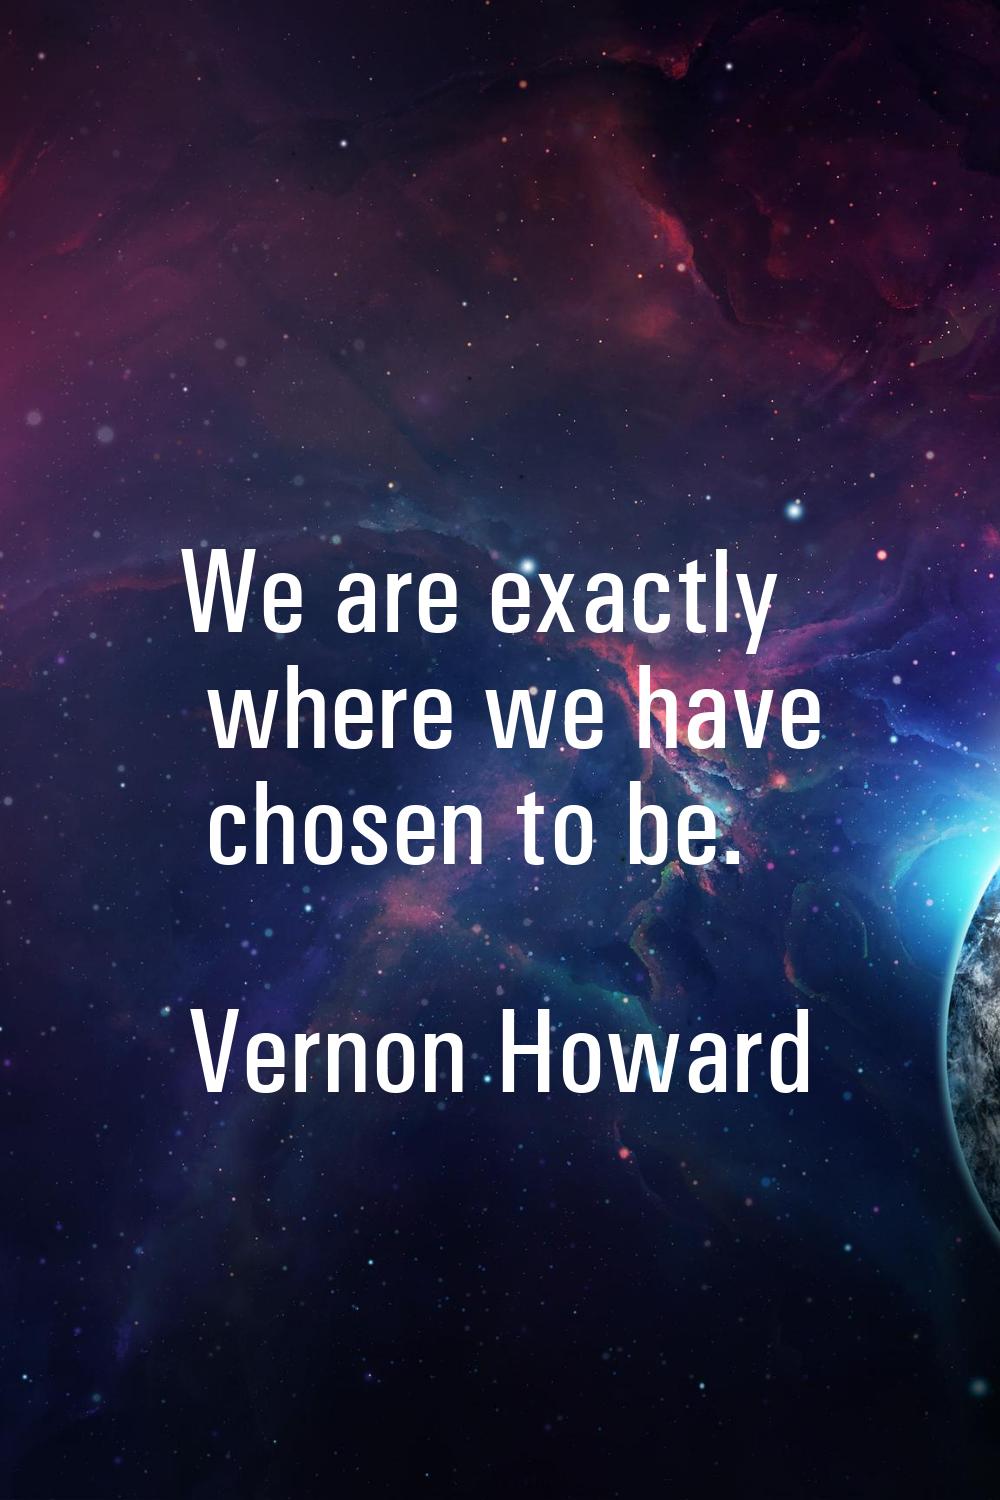 We are exactly where we have chosen to be.